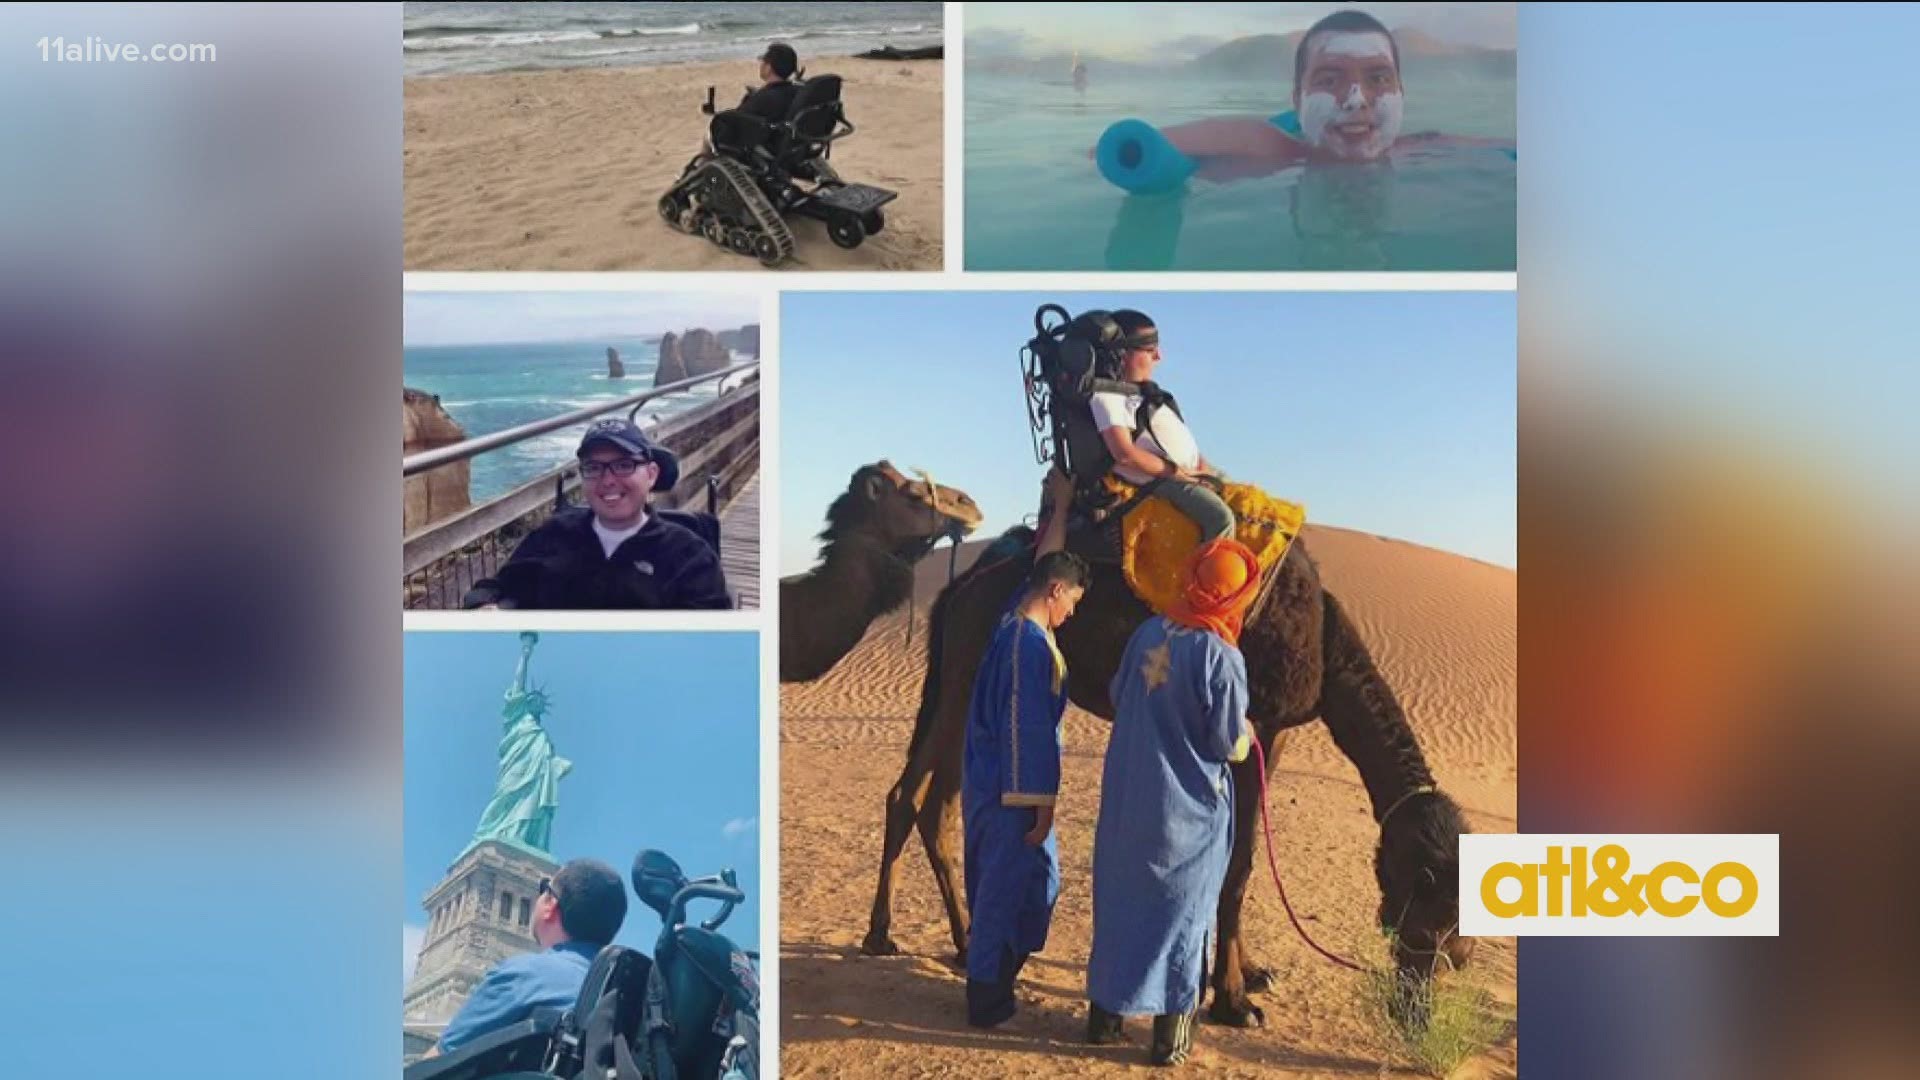 What an inspiring adventurer! Cory Lee has traveled to all 7 continents, likely the first for a powered wheelchair user.